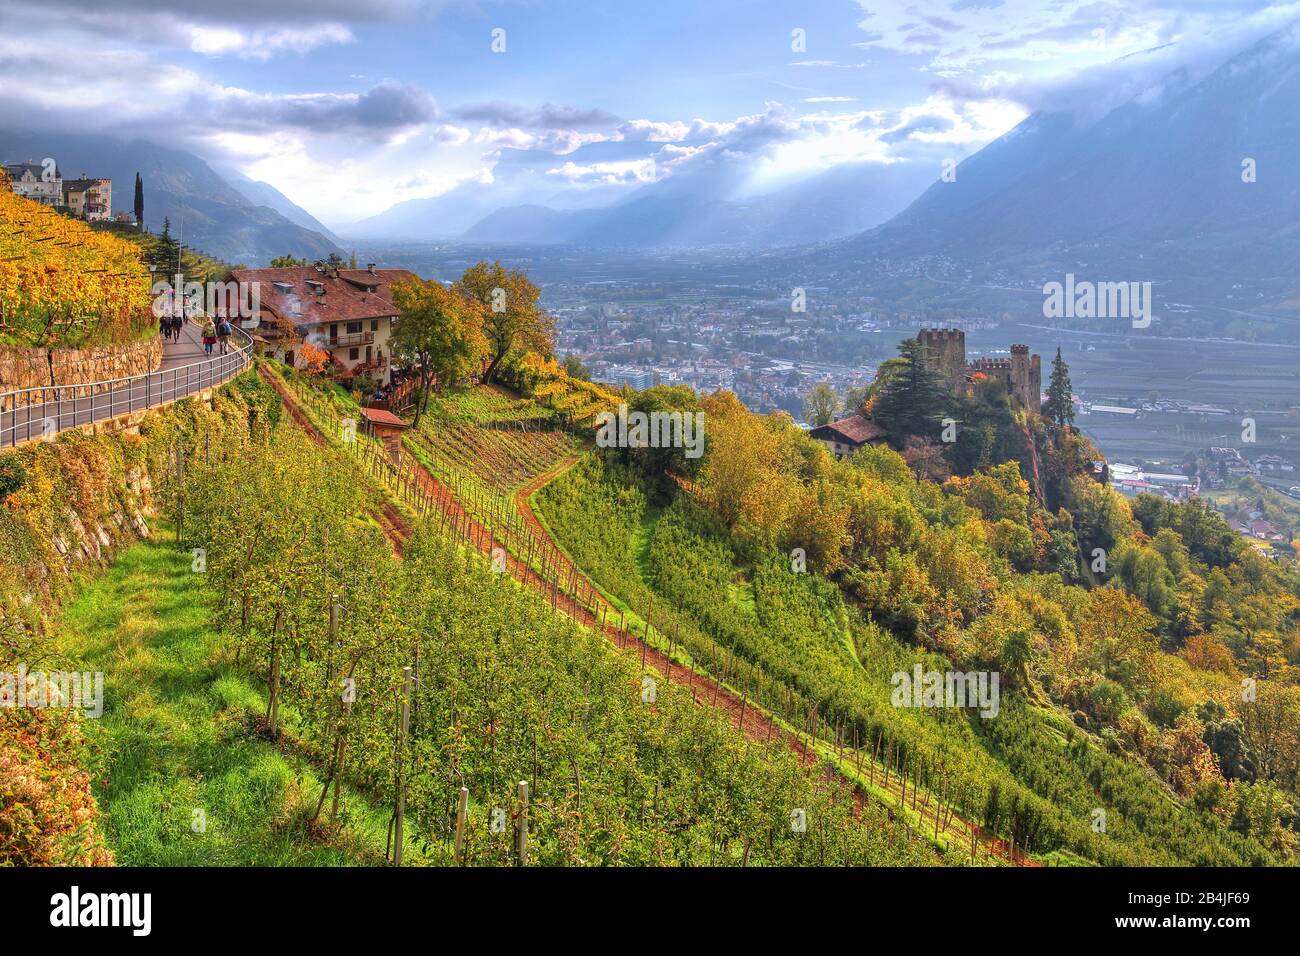 Promenade at the village with the Brunnenburg and view of the Adige Valley, Dorf Tirol, Burggrafenamt, South Tyrol, Italy Stock Photo